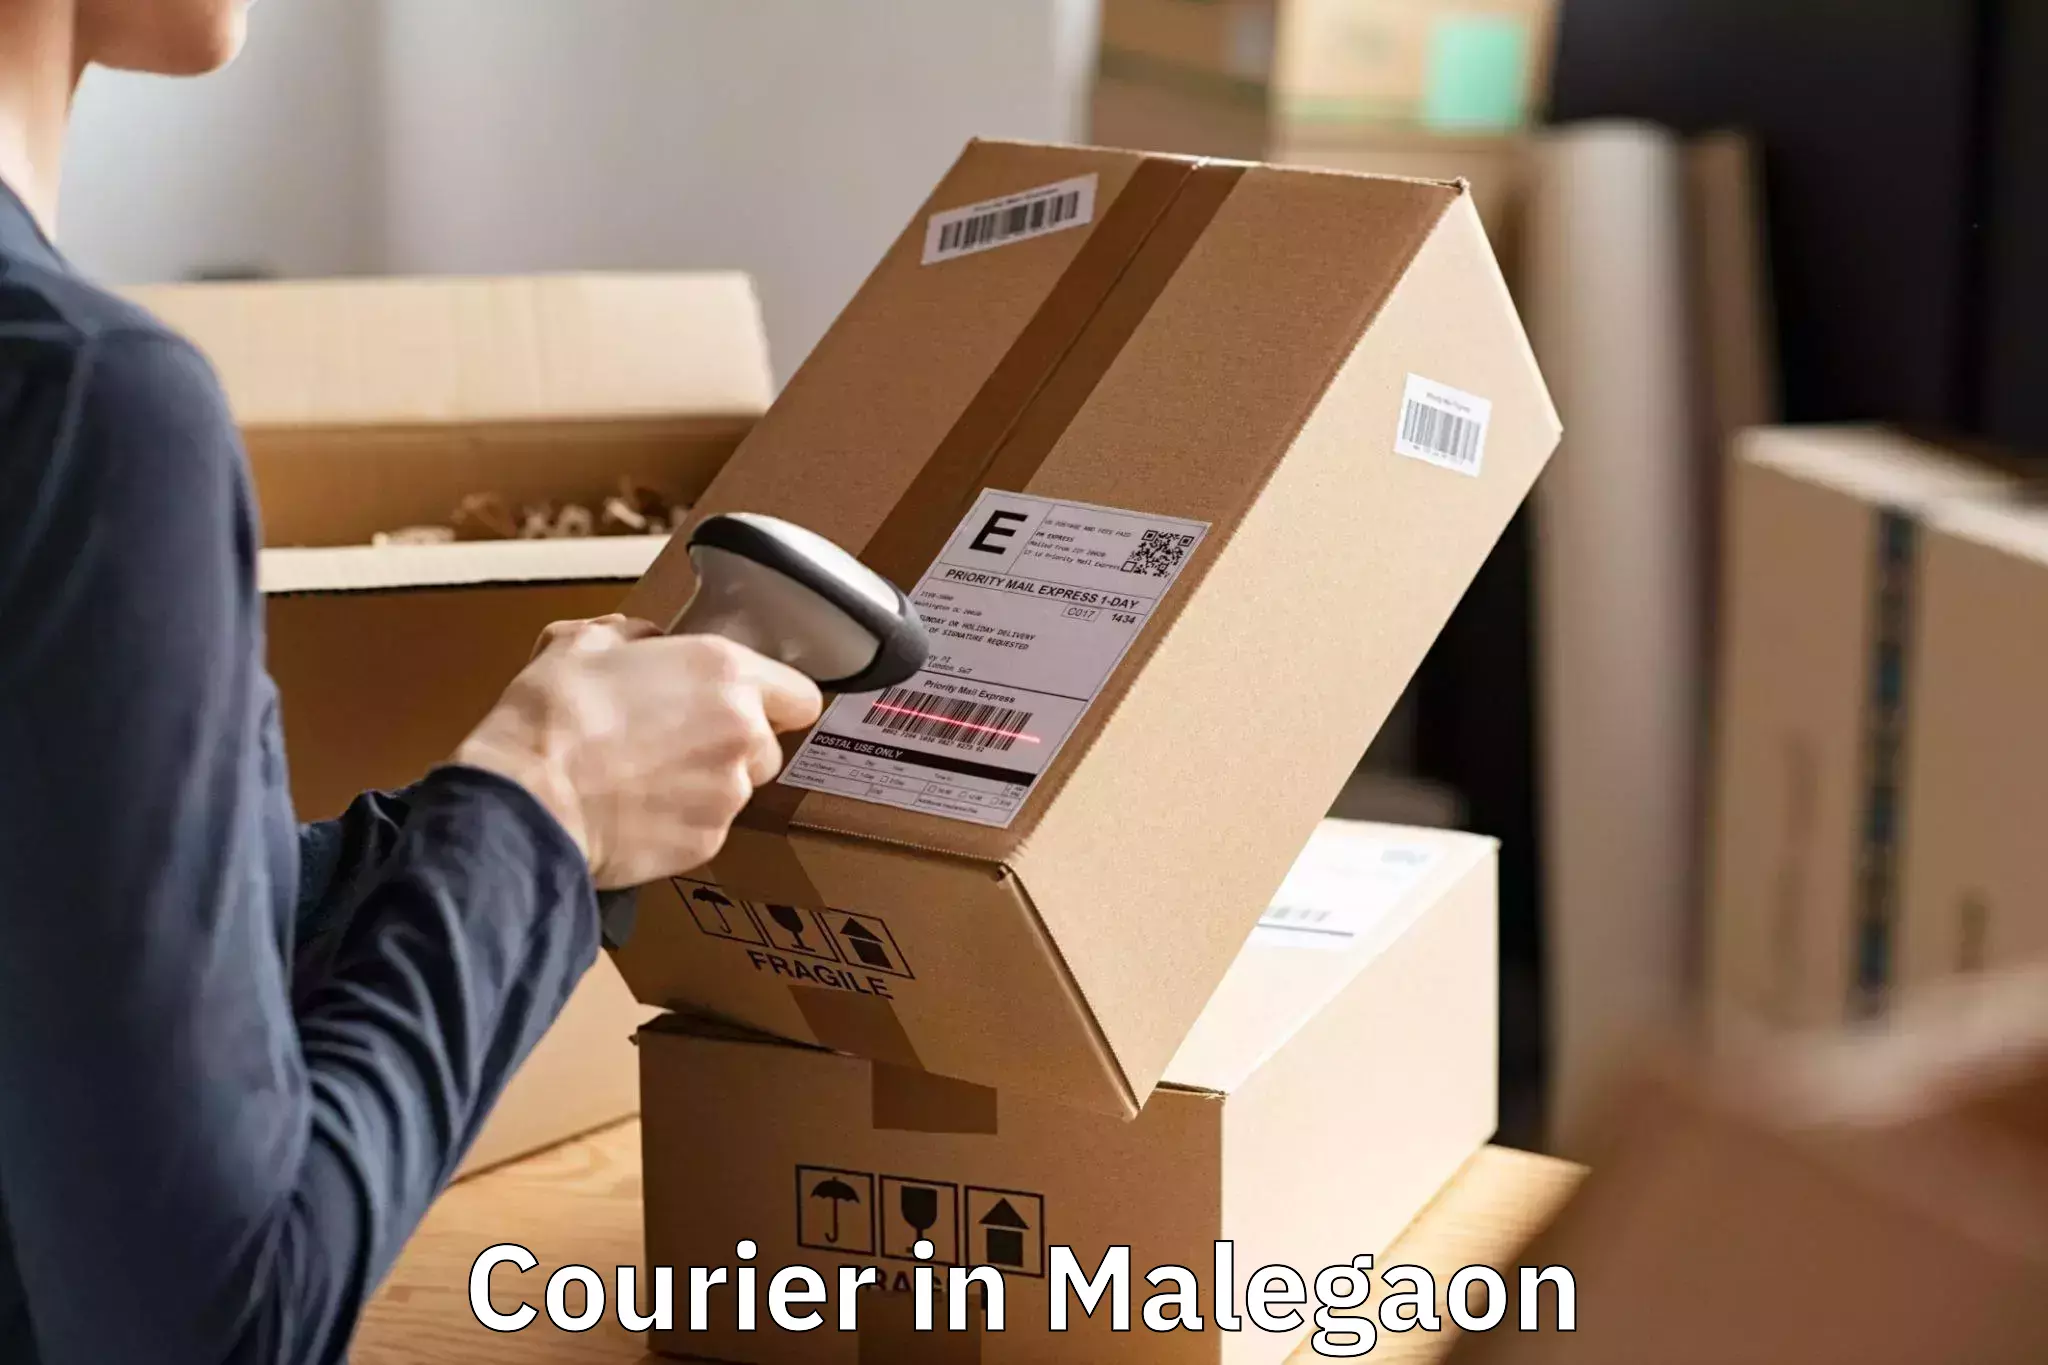 Easy Courier Booking in Malegaon, Maharashtra (MH)